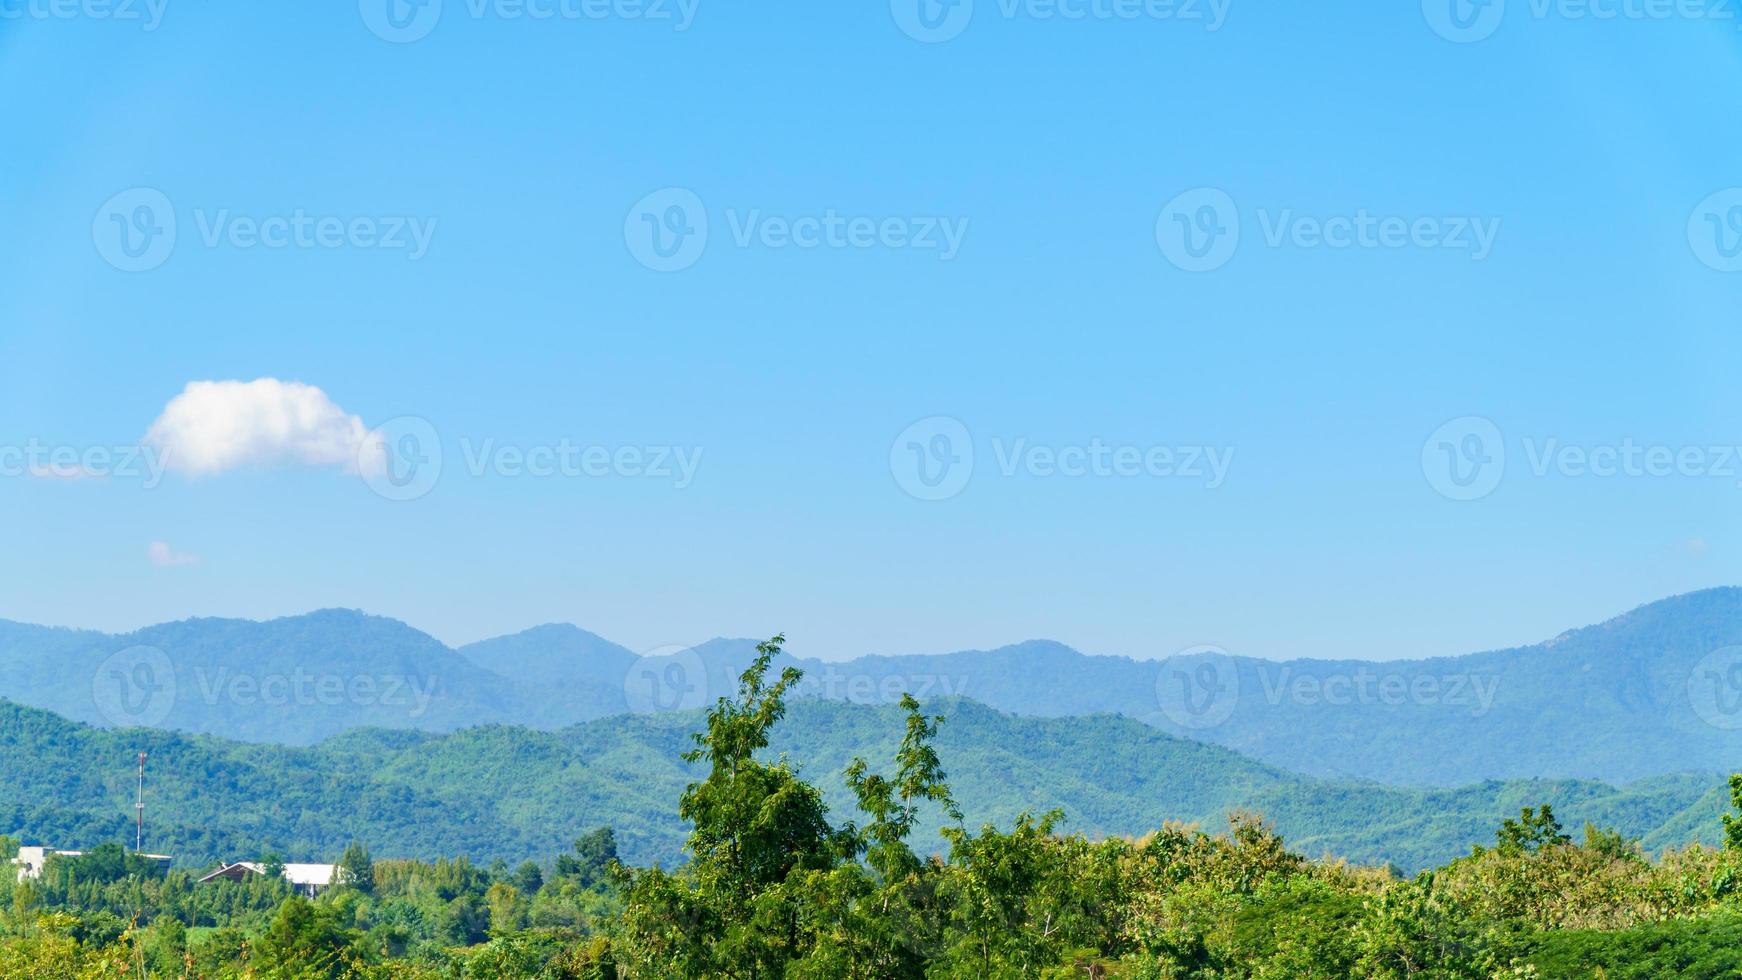 The mountains are filled with greenery against the blue sky. photo